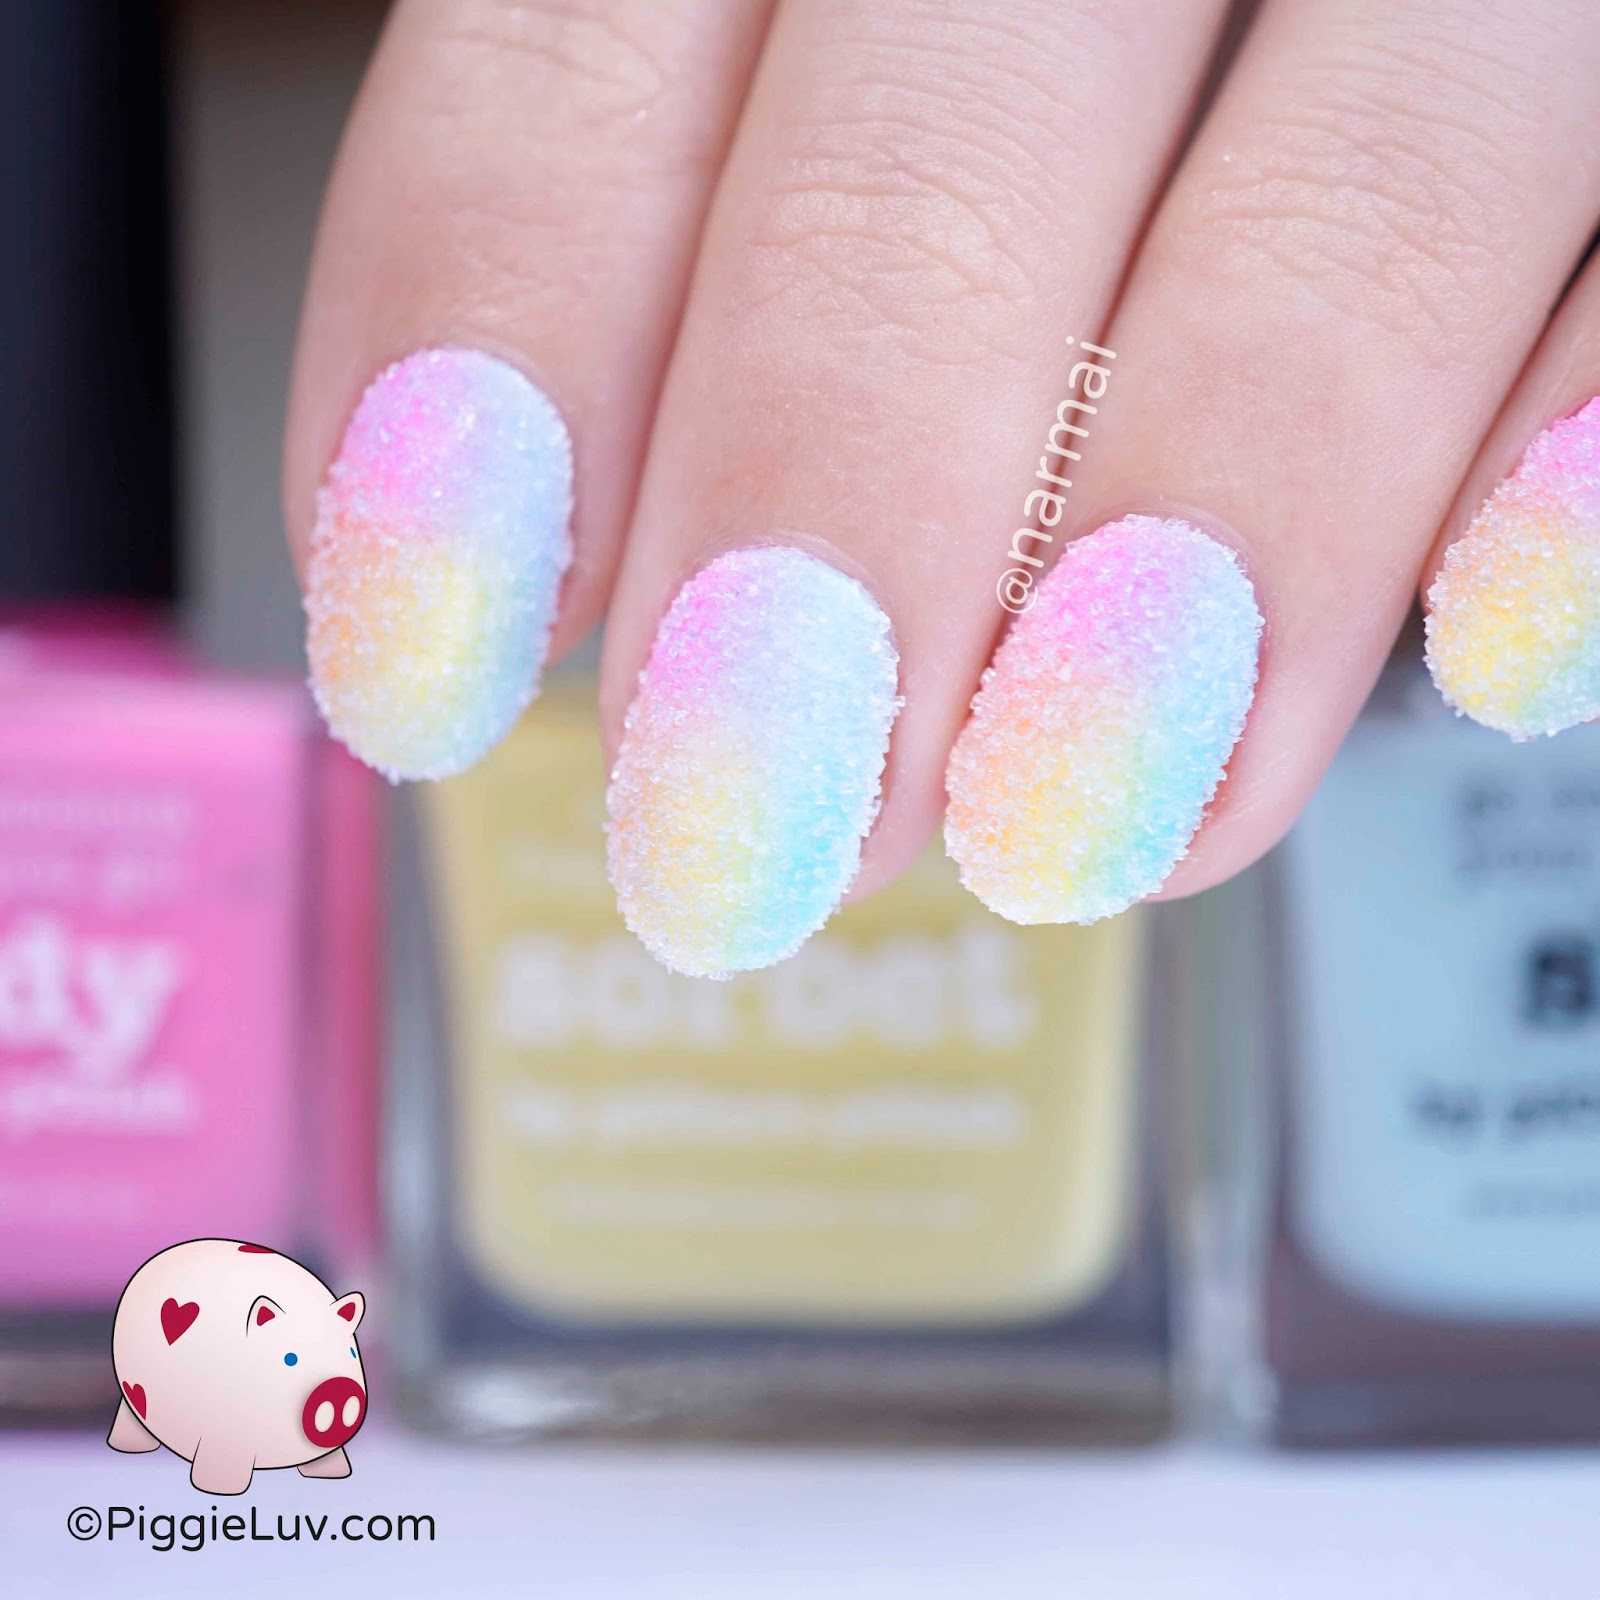 How to Do Colorful Spun Sugar Nails! « Nails & Manicure :: WonderHowTo